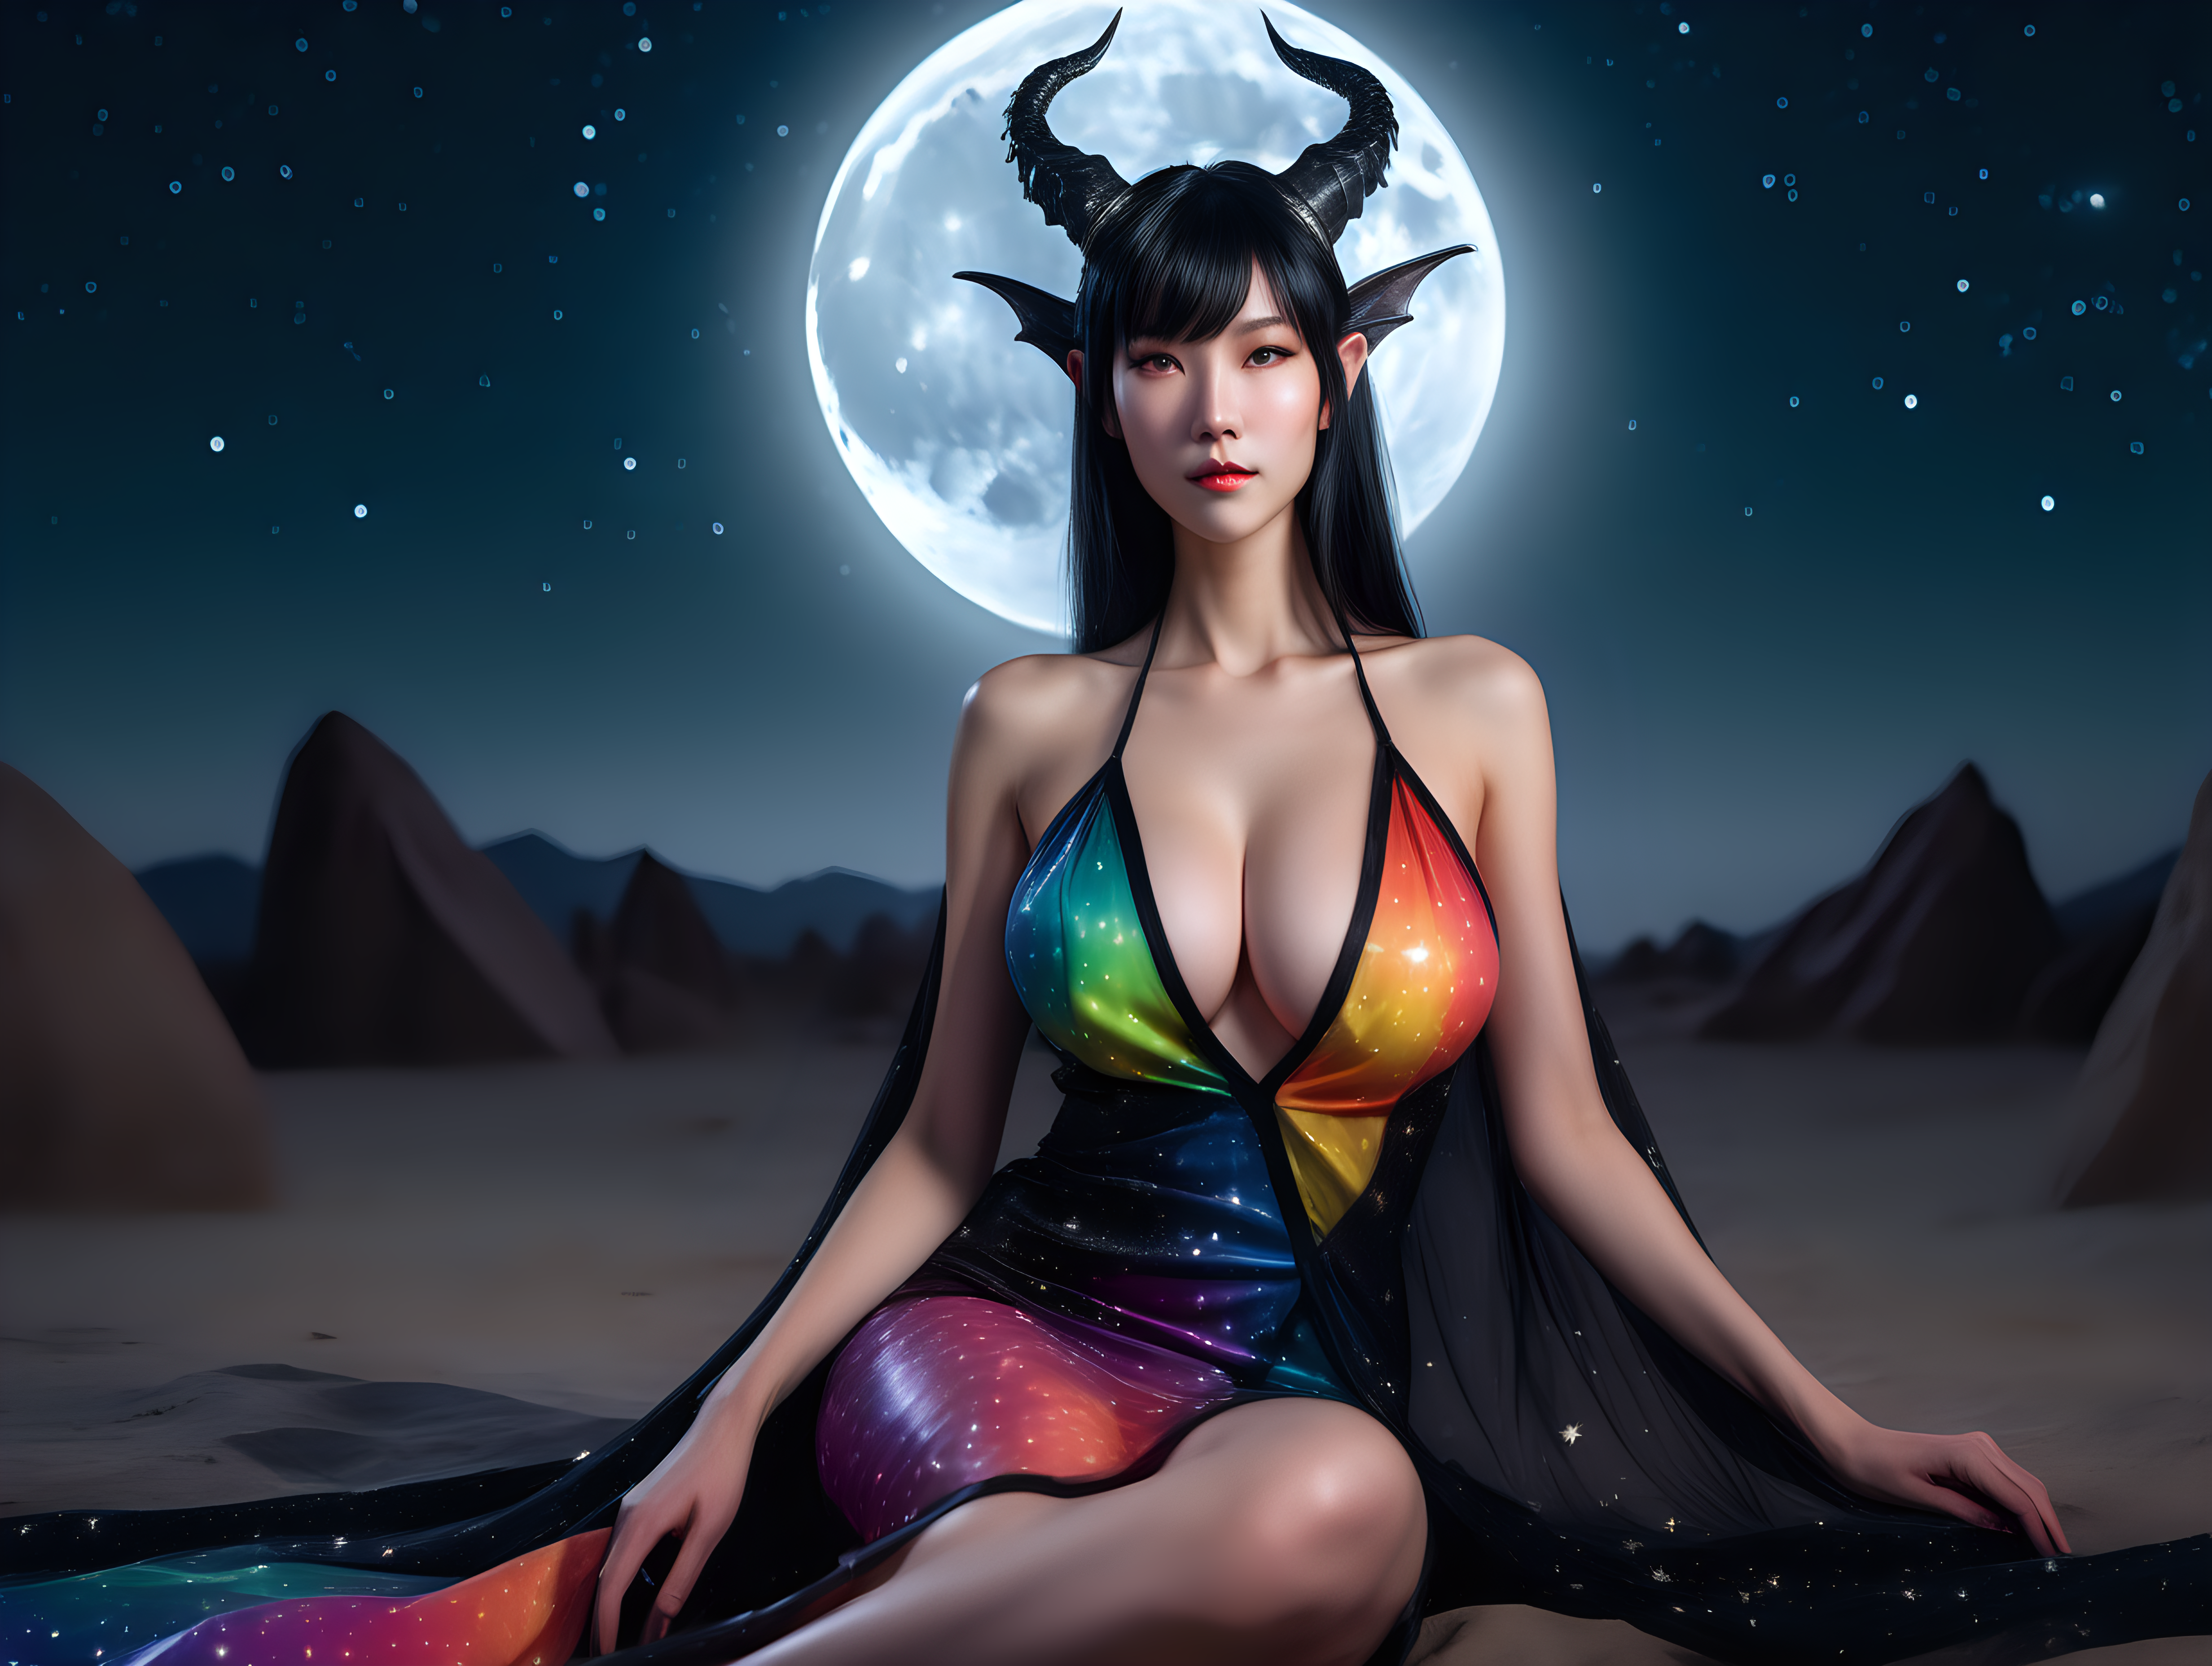 ultra-realistic high resolution and highly detailed close up adult film photoshoot of a slender female human dragon, with sleek pointy black horns gently swept straight backwards over head, with massive breasts, colourful open front loose transparent dress, sitting under a starry sky with the moon in the background, looking at the camera